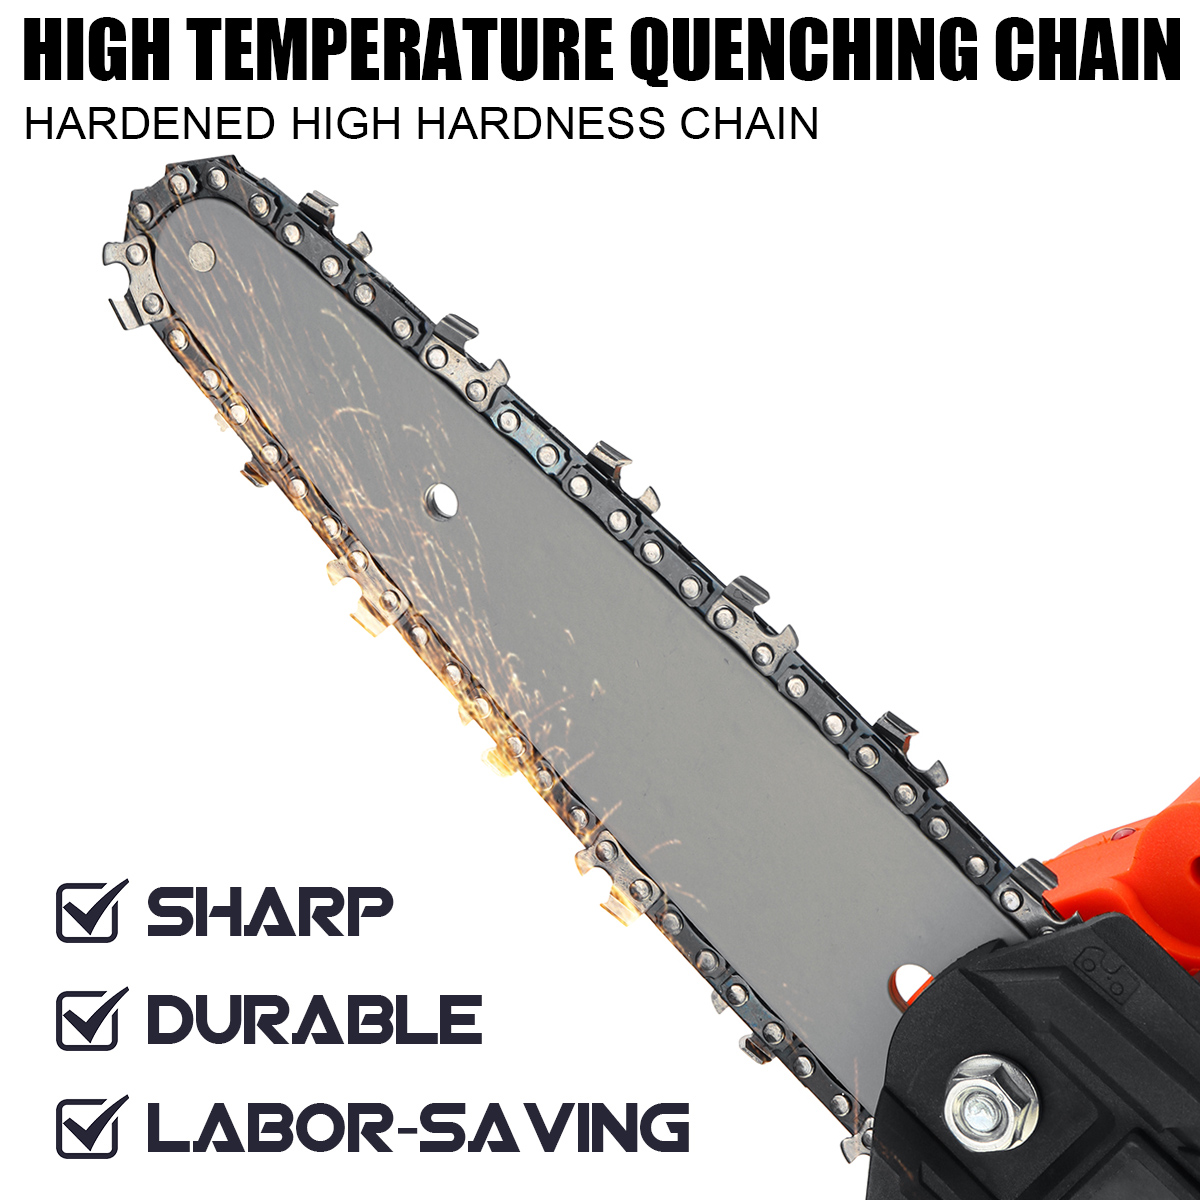 88VF-4Inch-6Inch-Cordless-Electric-Chain-Saw-One-Hand-Mini-Saw-Wood-Cutter-Woodworking-Tool-W-12-Bat-1870556-11